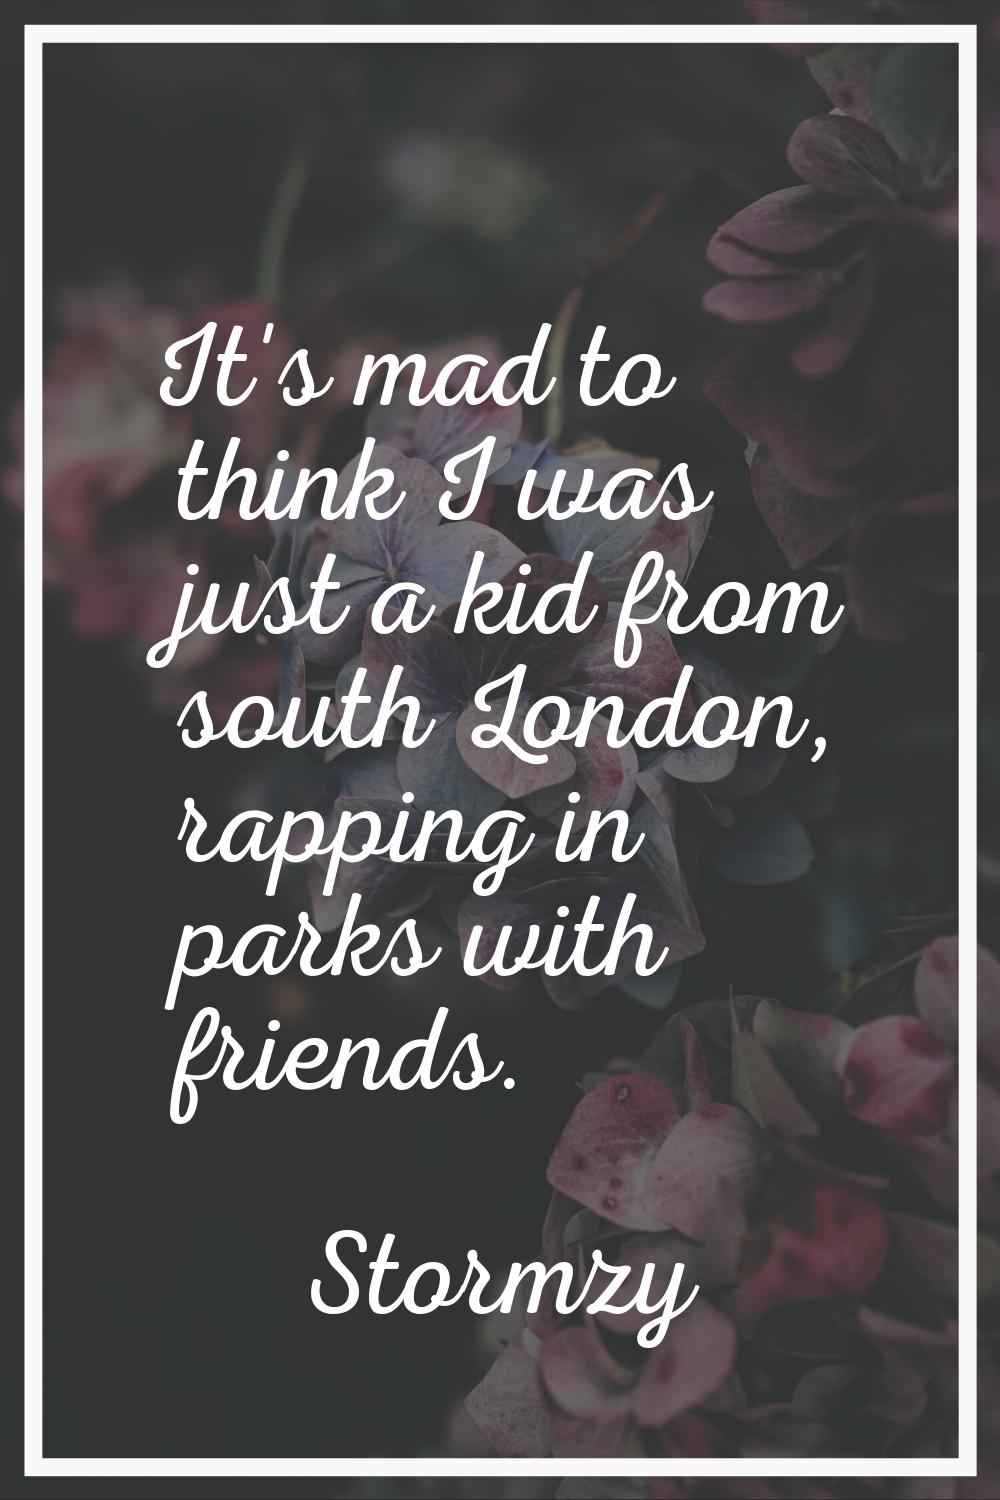 It's mad to think I was just a kid from south London, rapping in parks with friends.